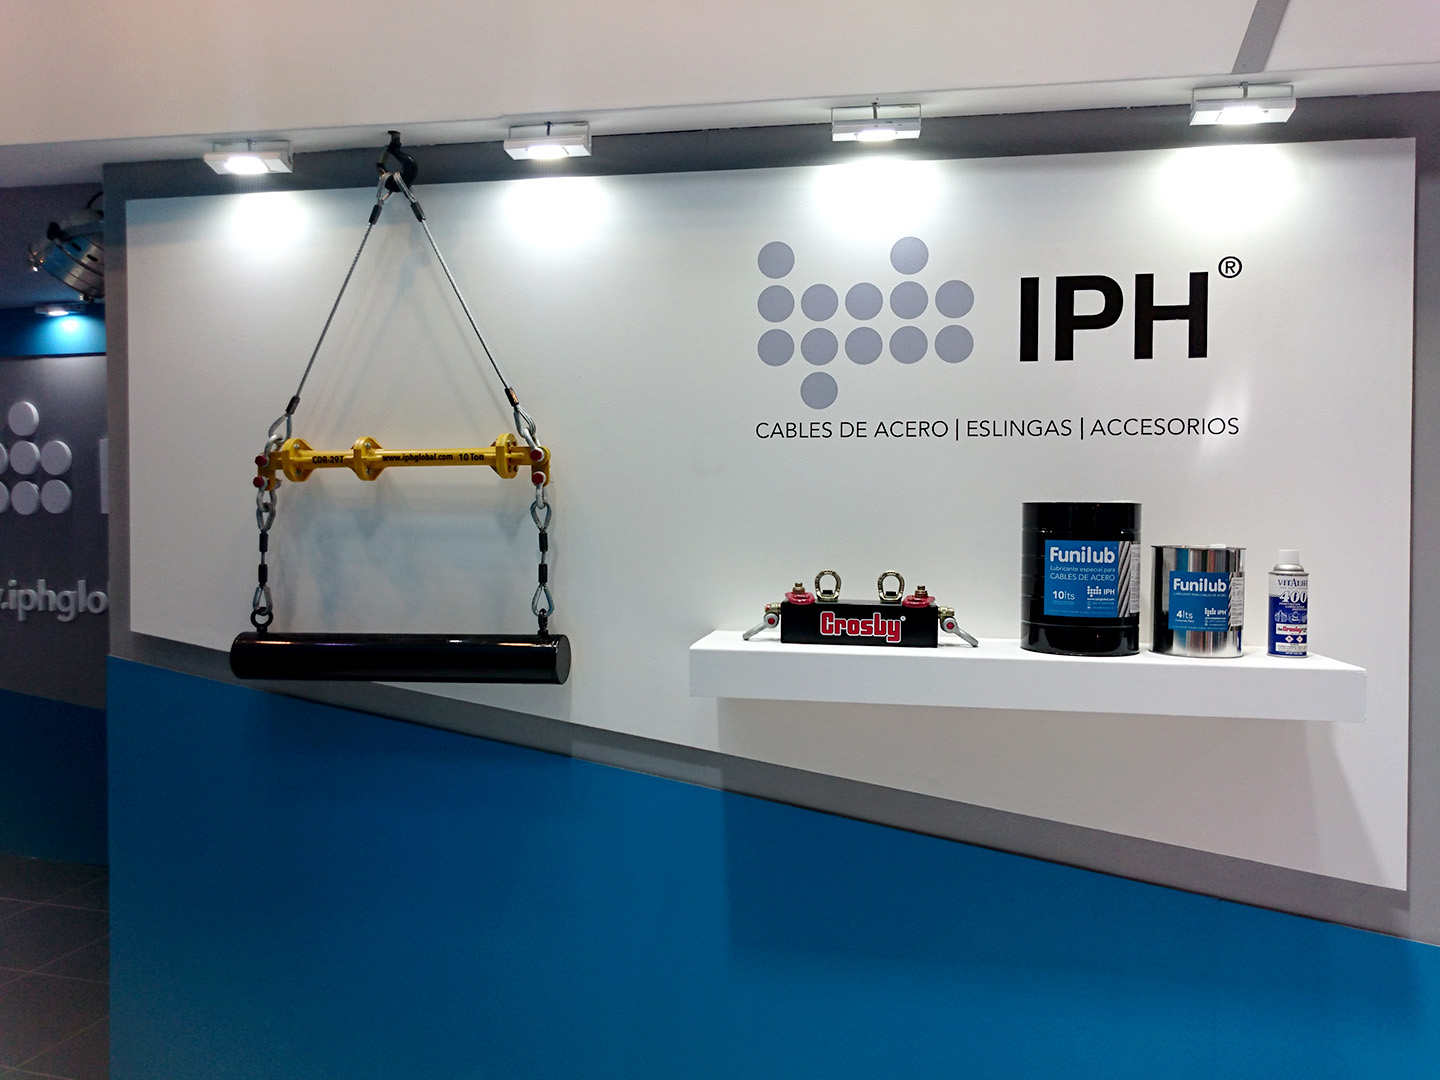 SUCCESSFUL EDITION FOR IPH AT AOG EXPO 20192